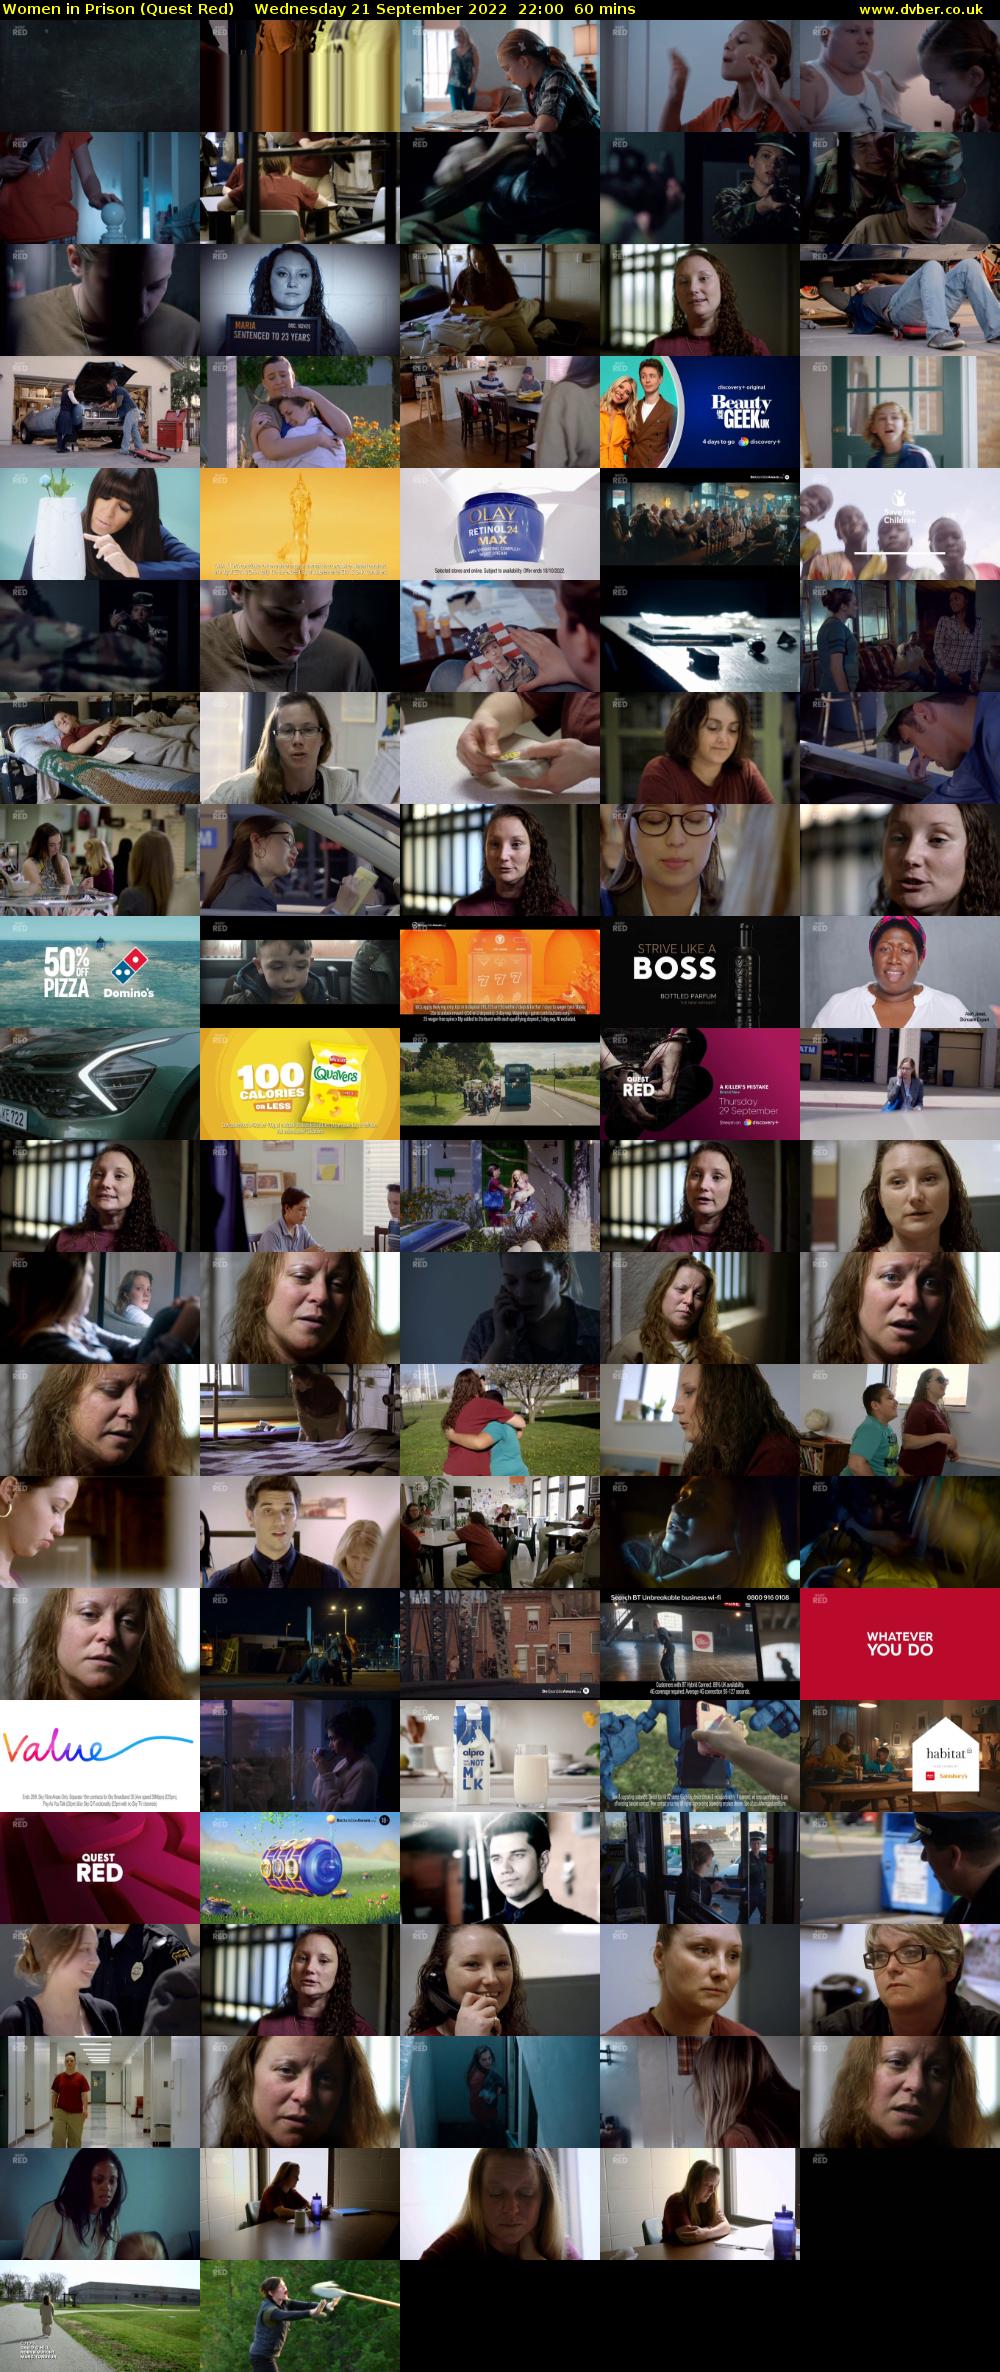 Women in Prison (Quest Red) Wednesday 21 September 2022 22:00 - 23:00